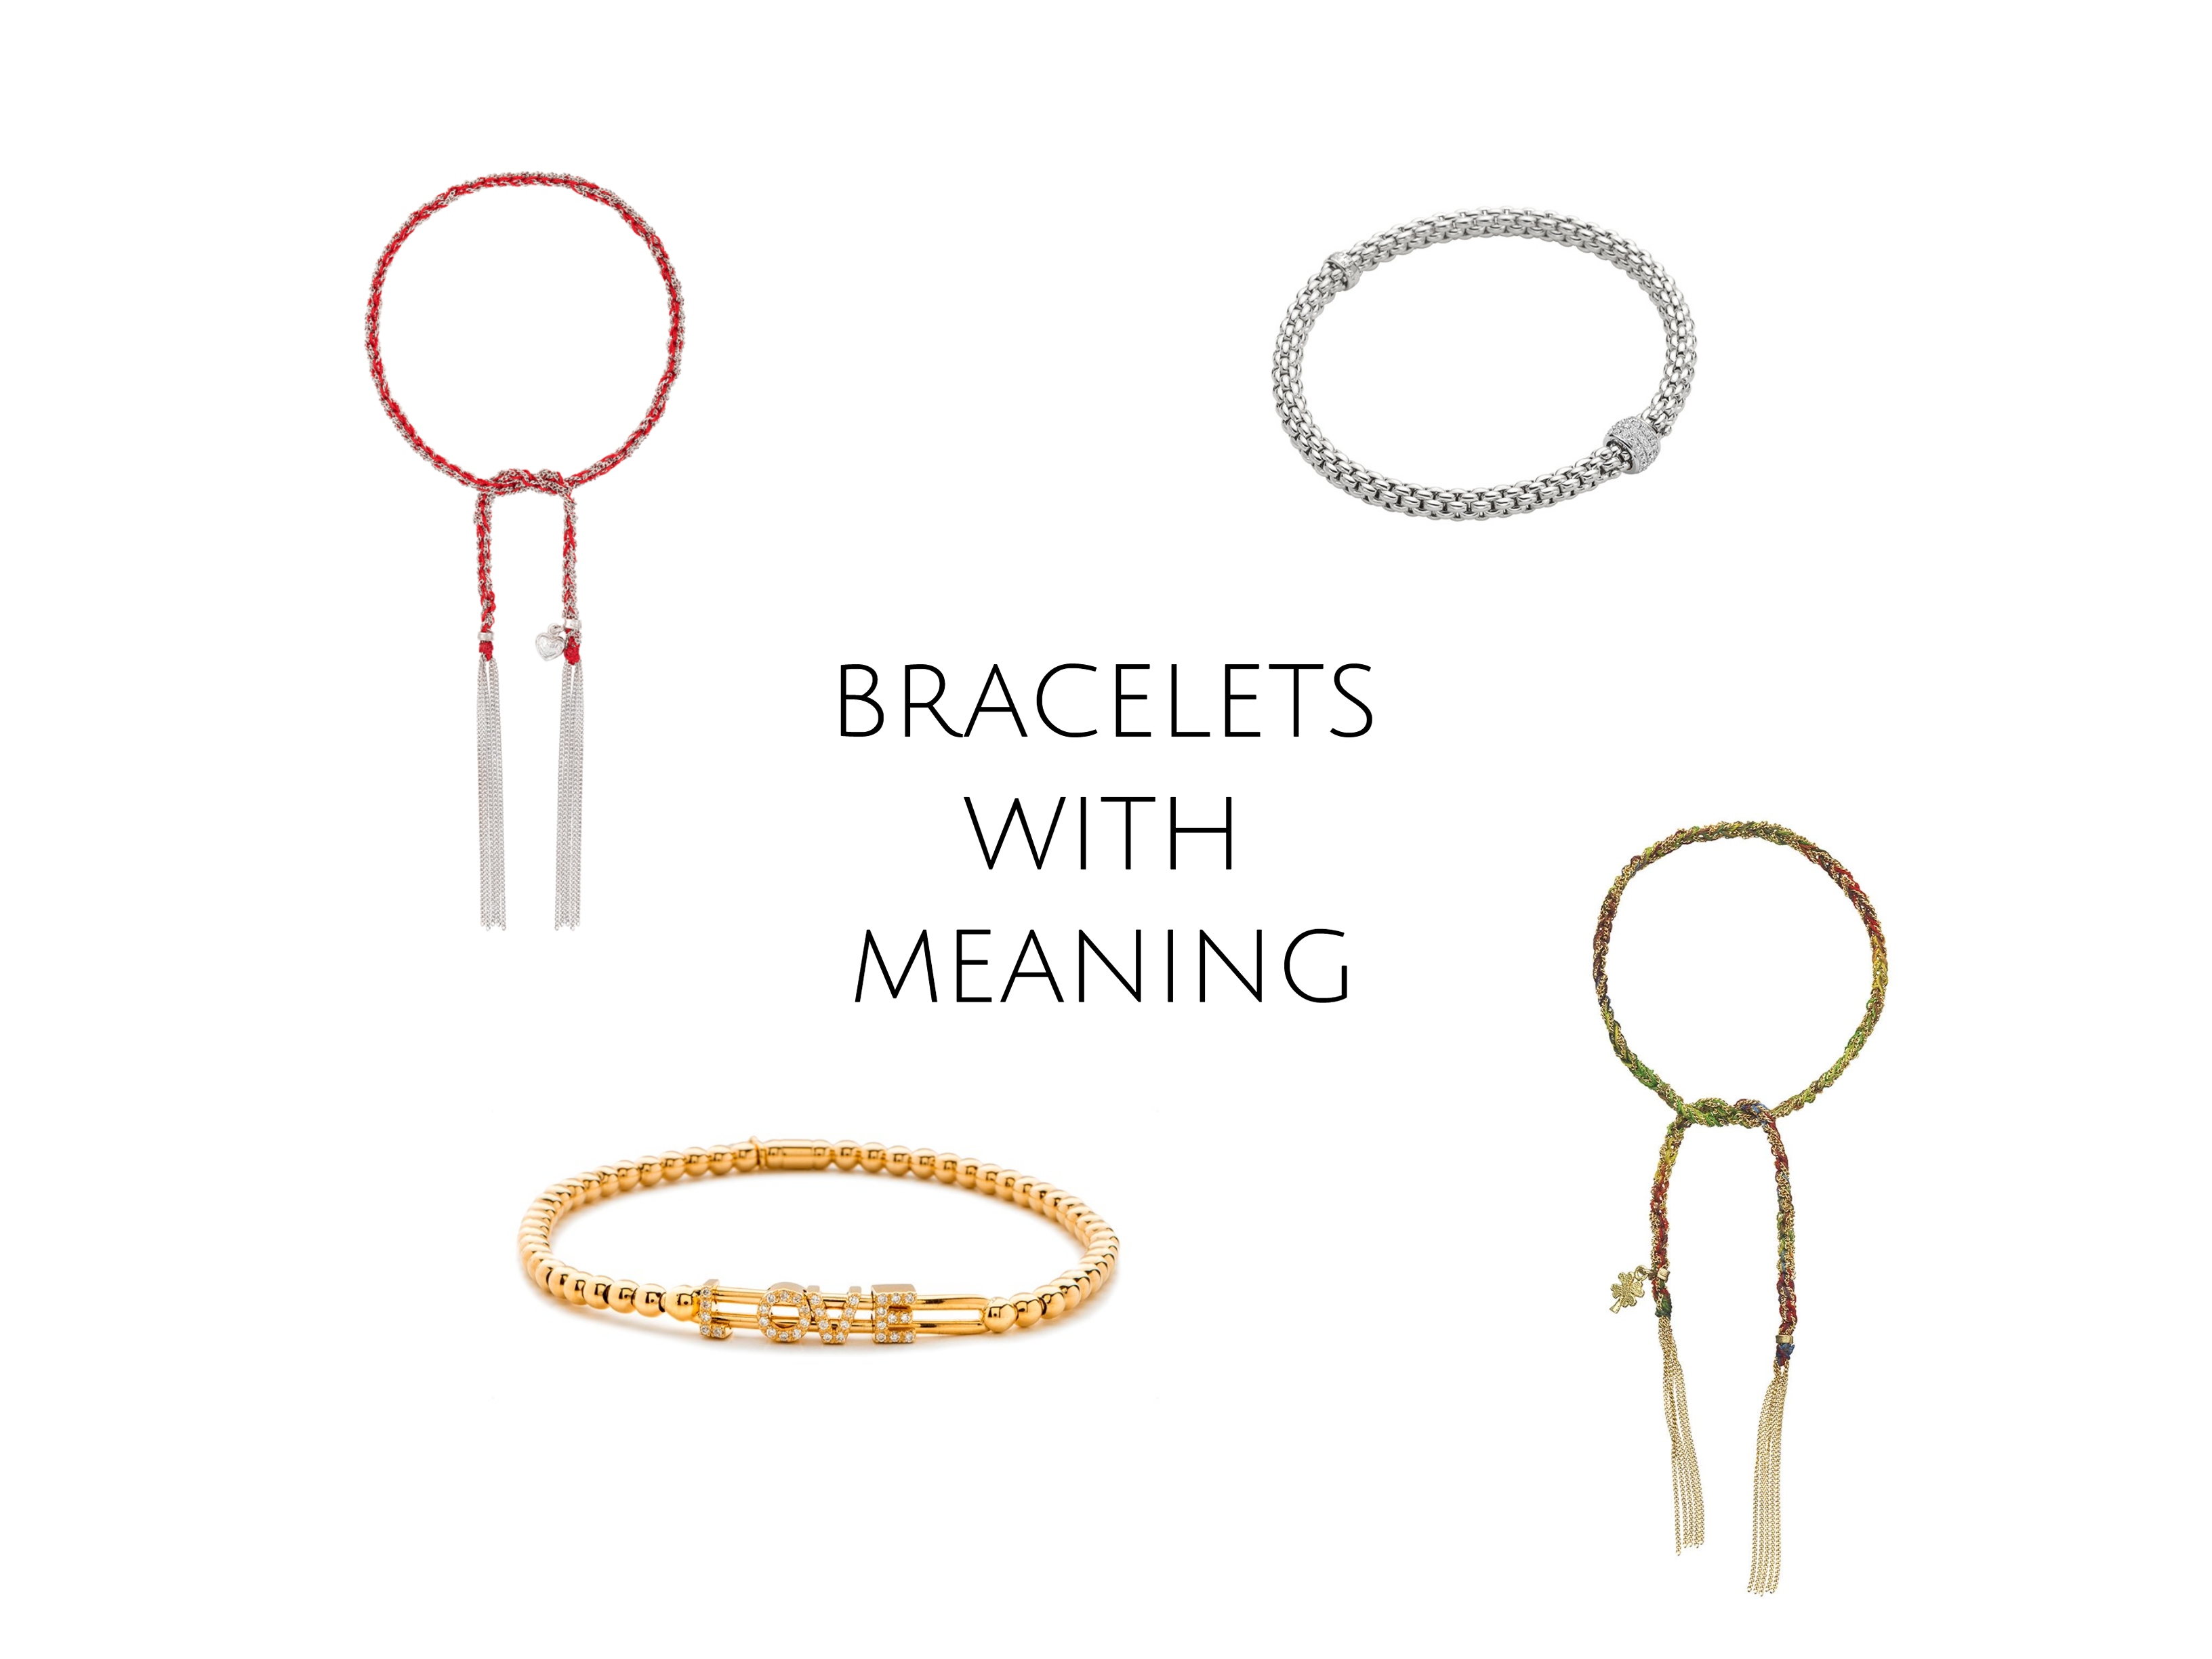 Bracelets with Meaning